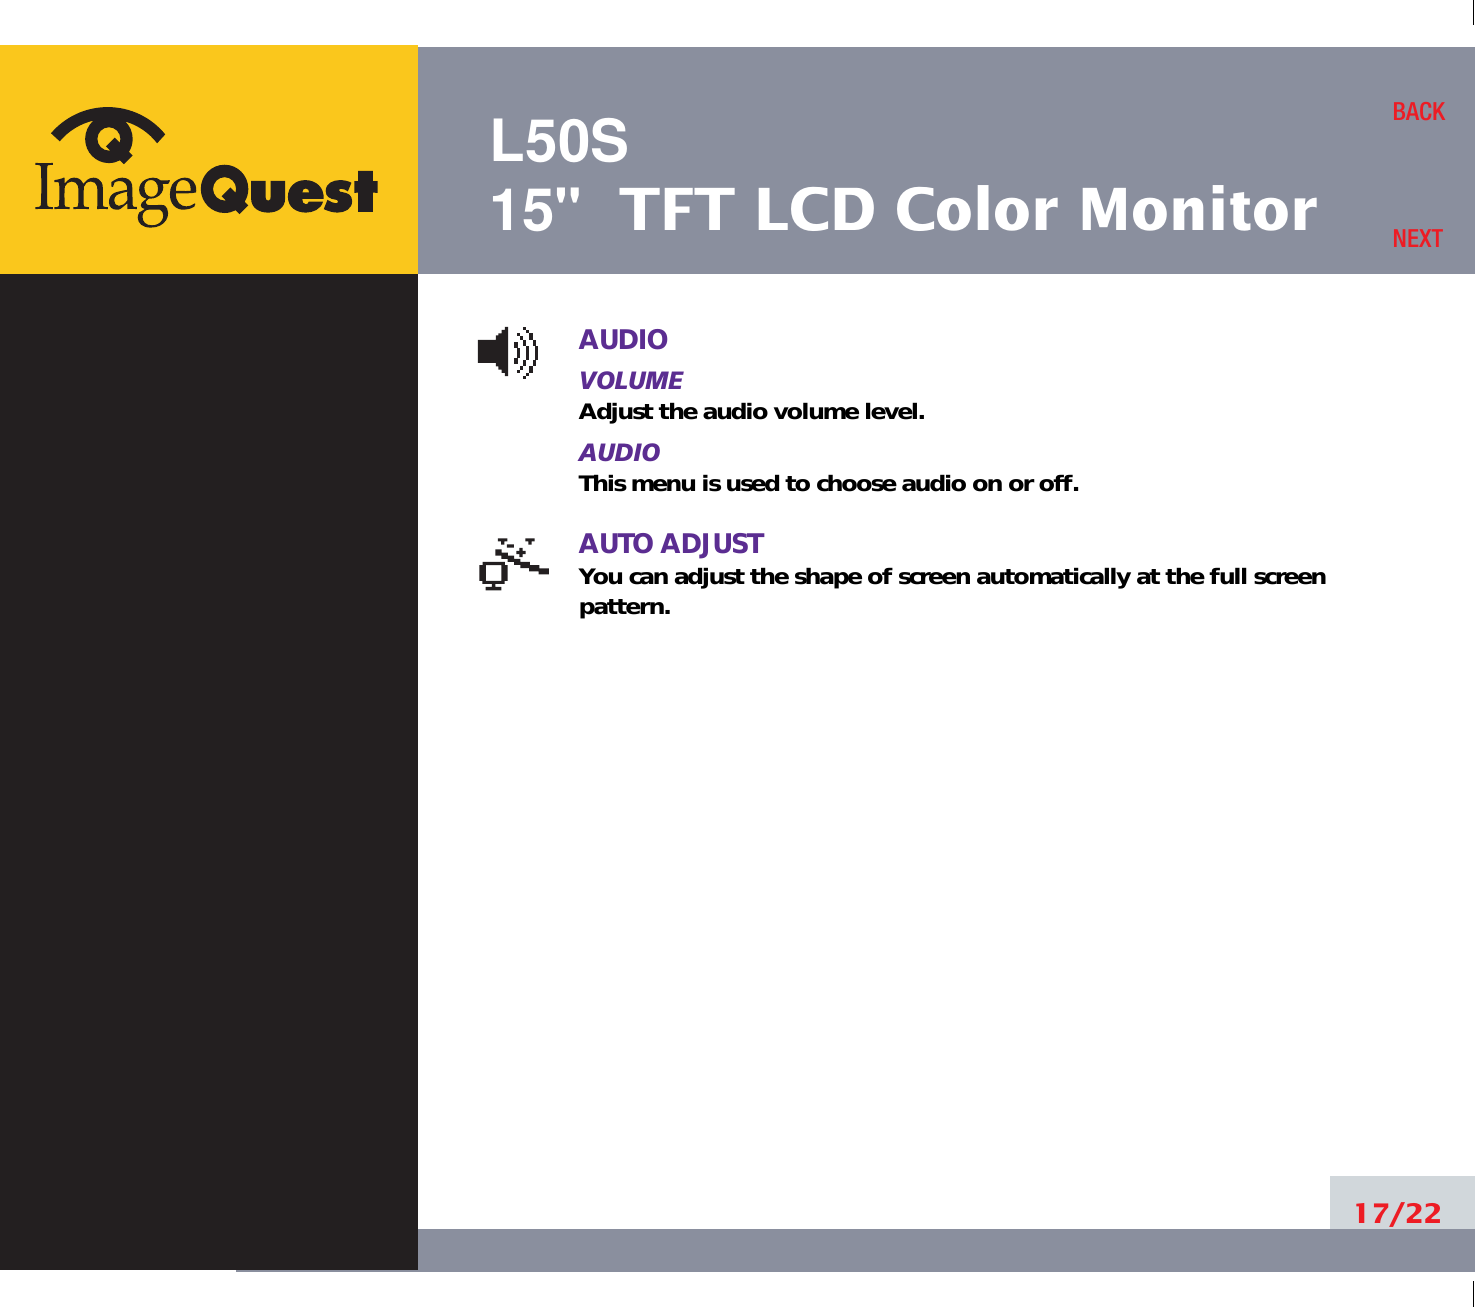 L50S15&quot; TFT LCD Color MonitorAUDIOVOLUMEAdjust the audio volume level.AUDIOThis menu is used to choose audio on or off.AUTO ADJUSTYou can adjust the shape of screen automatically at the full screenpattern.17/22BACKNEXT